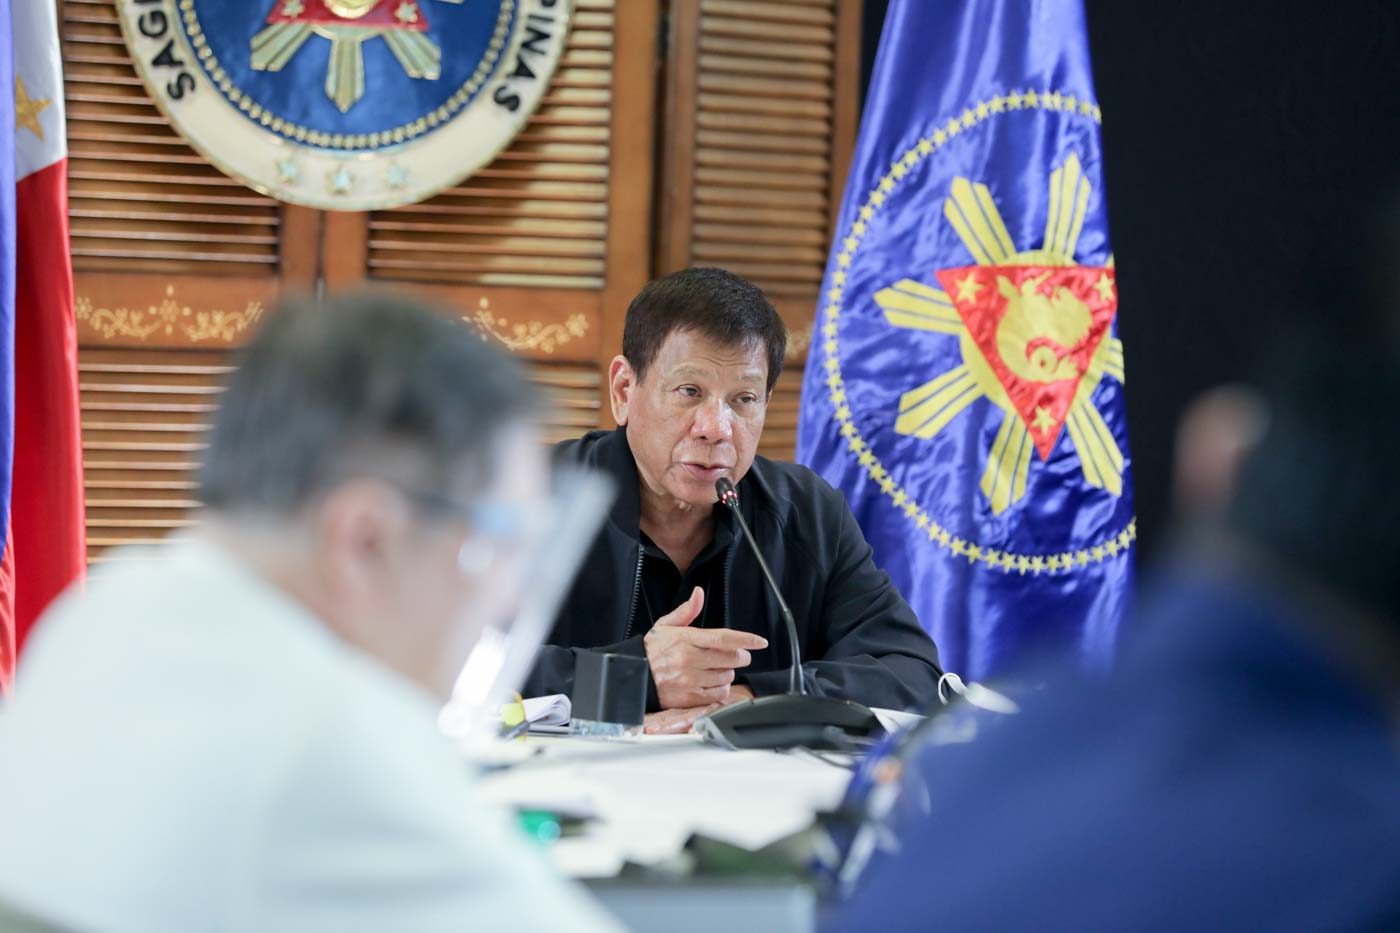 Duterte vows transparency in spending of COVID-19 funds